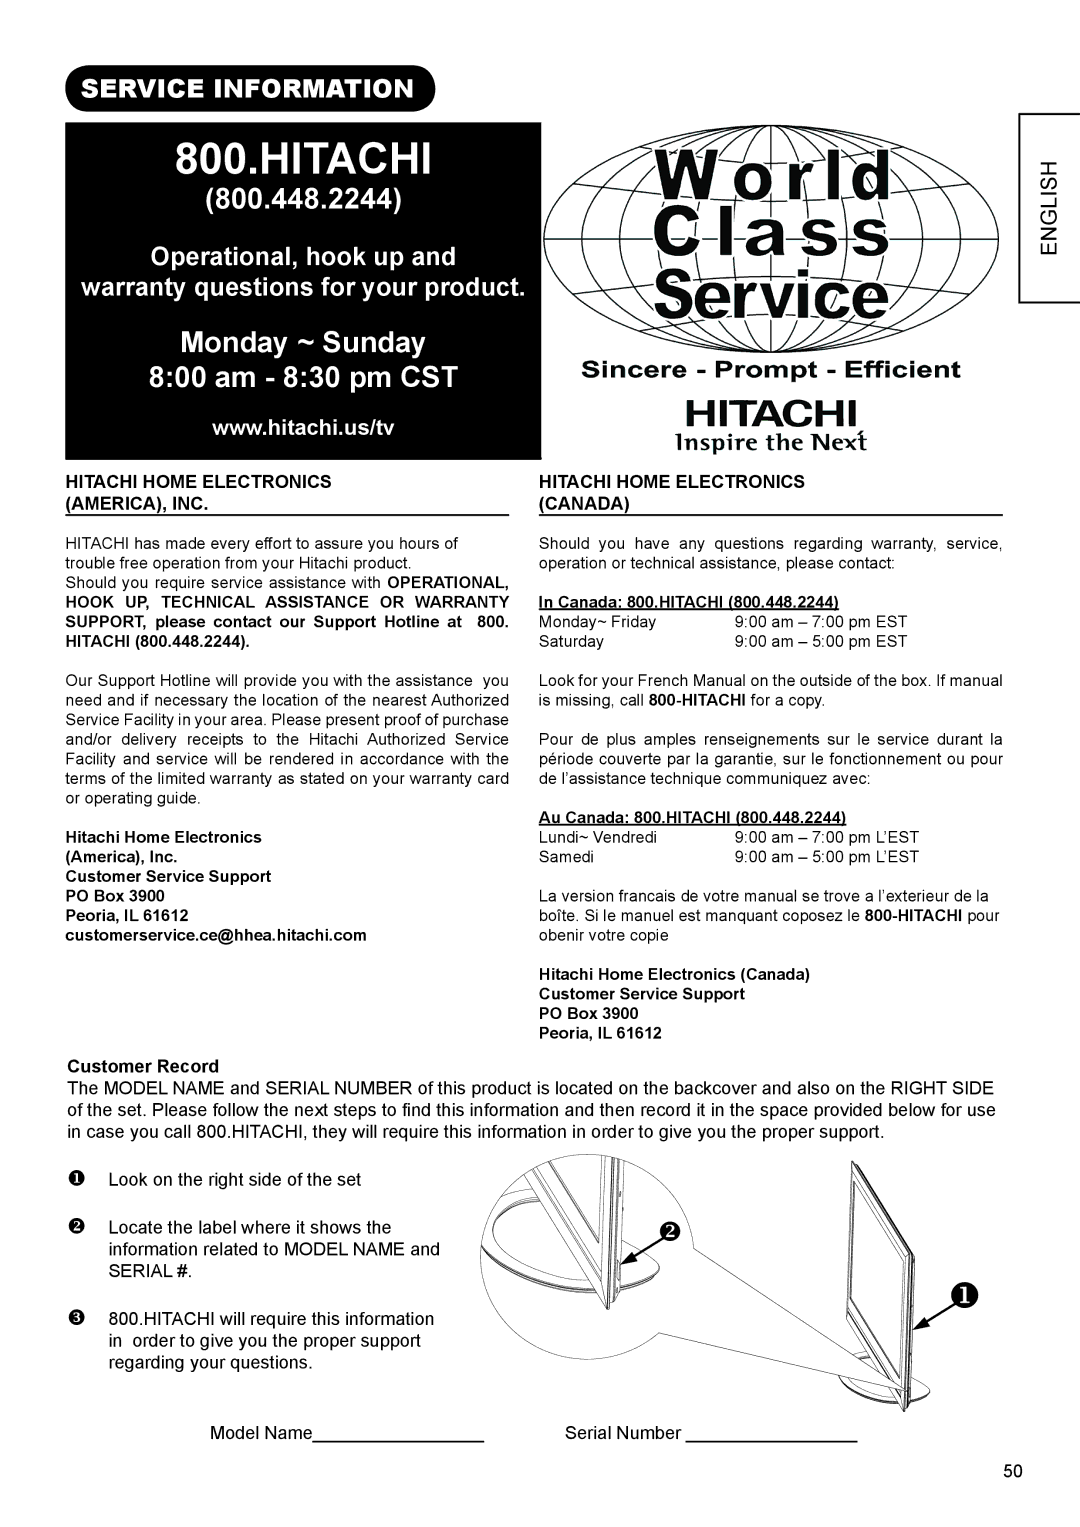 Hitachi UT32A302W manual Service Information, Operational, hook up Warranty questions for your product, Customer Record 